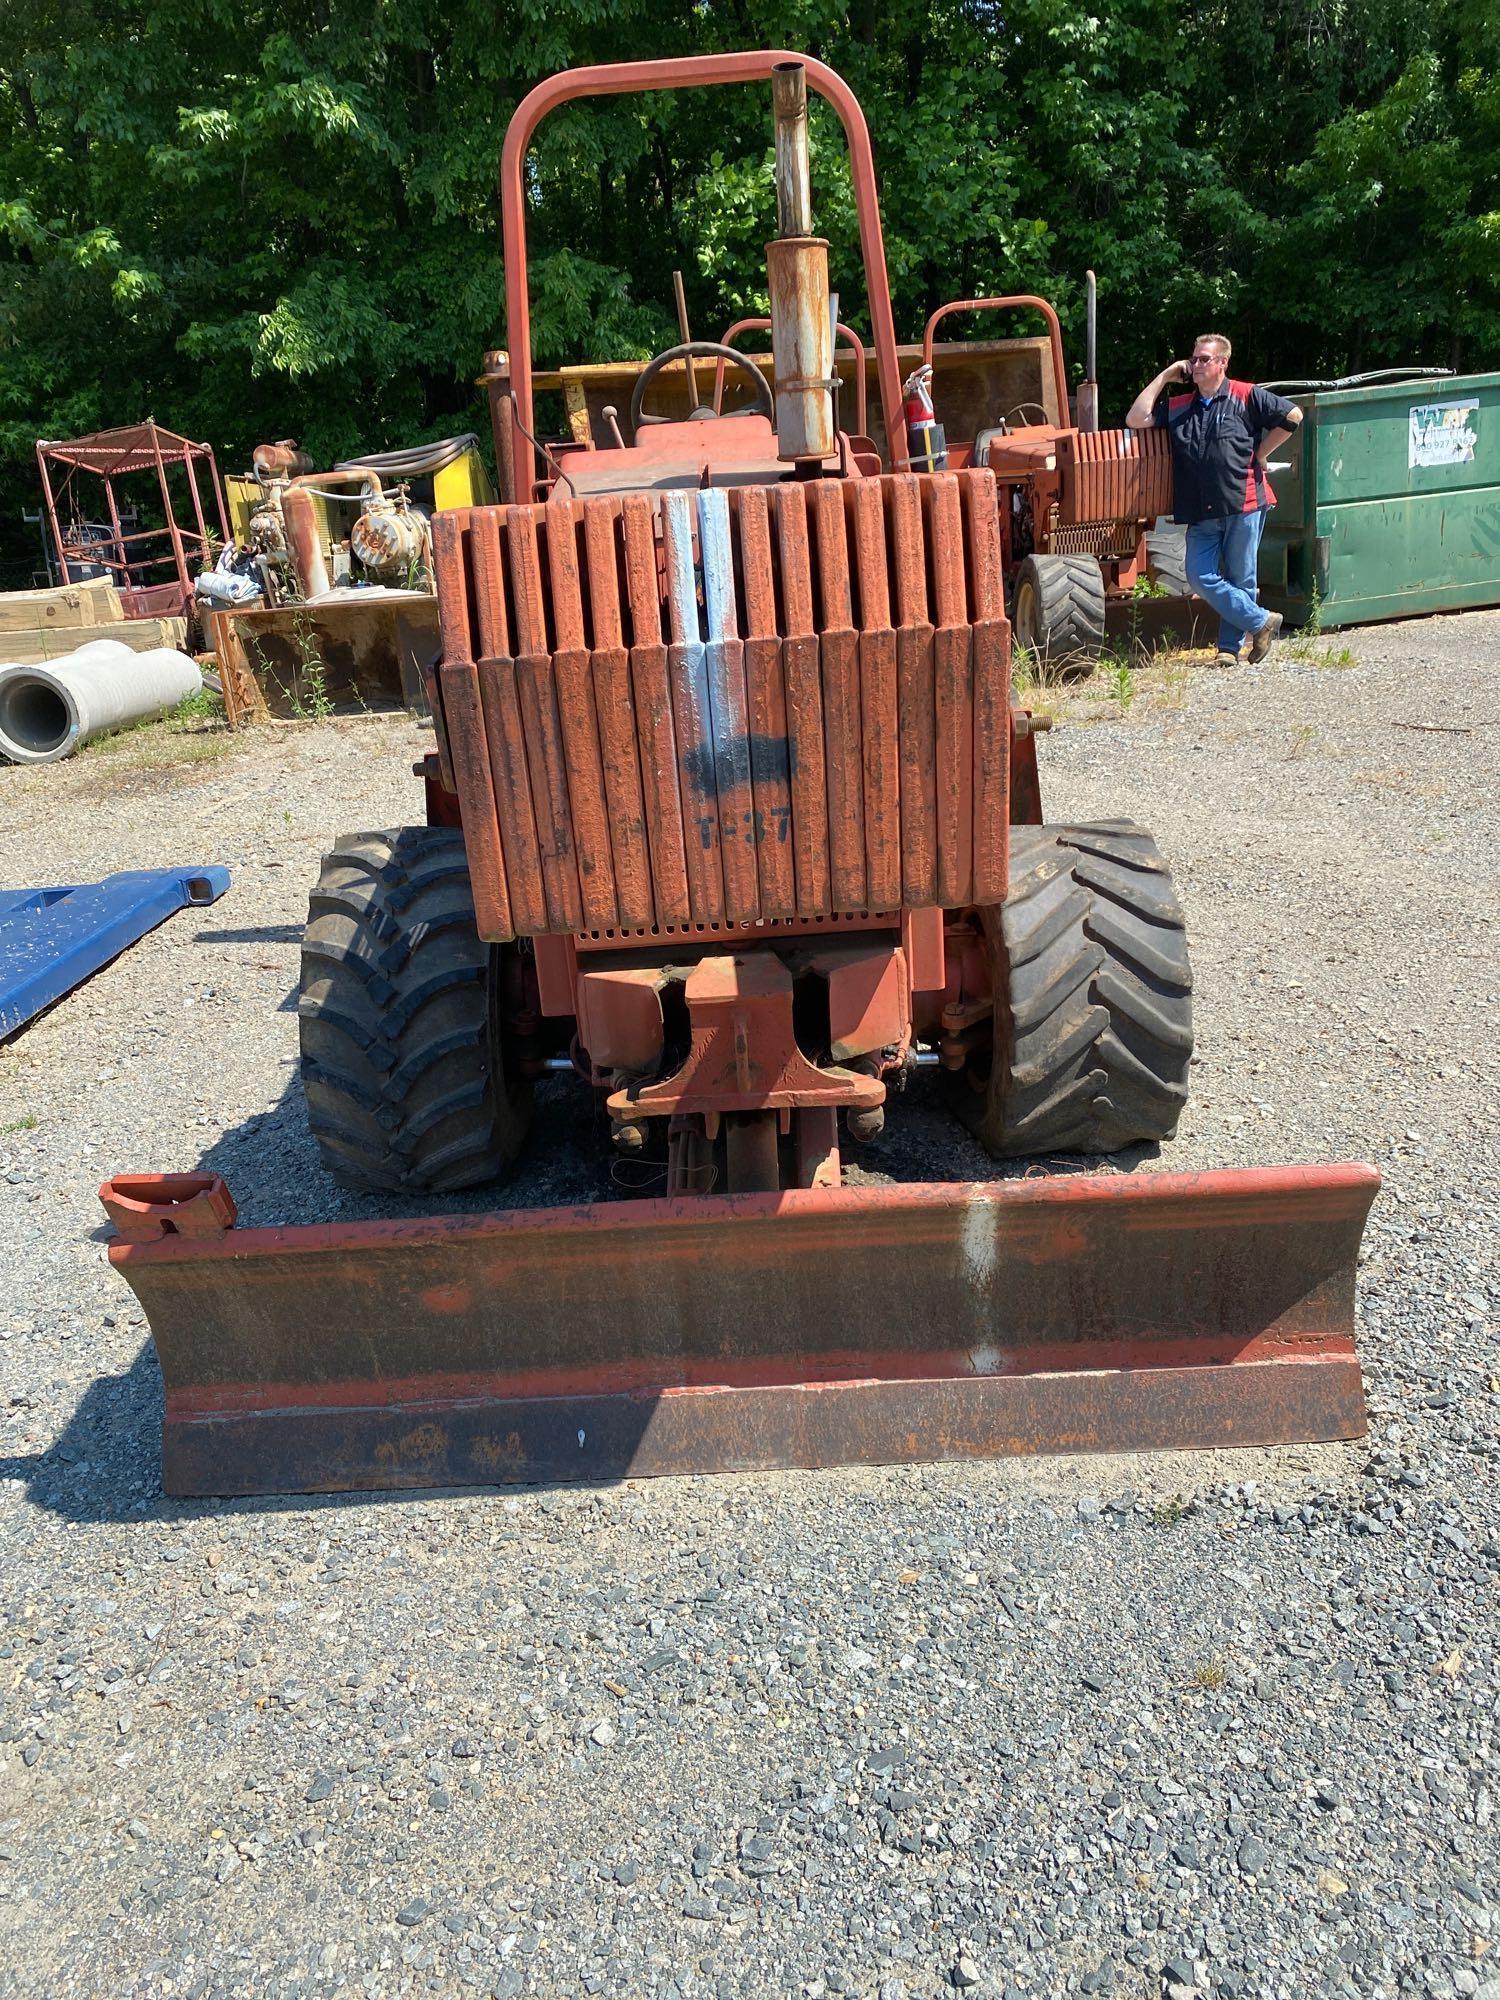 1997 Ditch Witch Trencher 5110